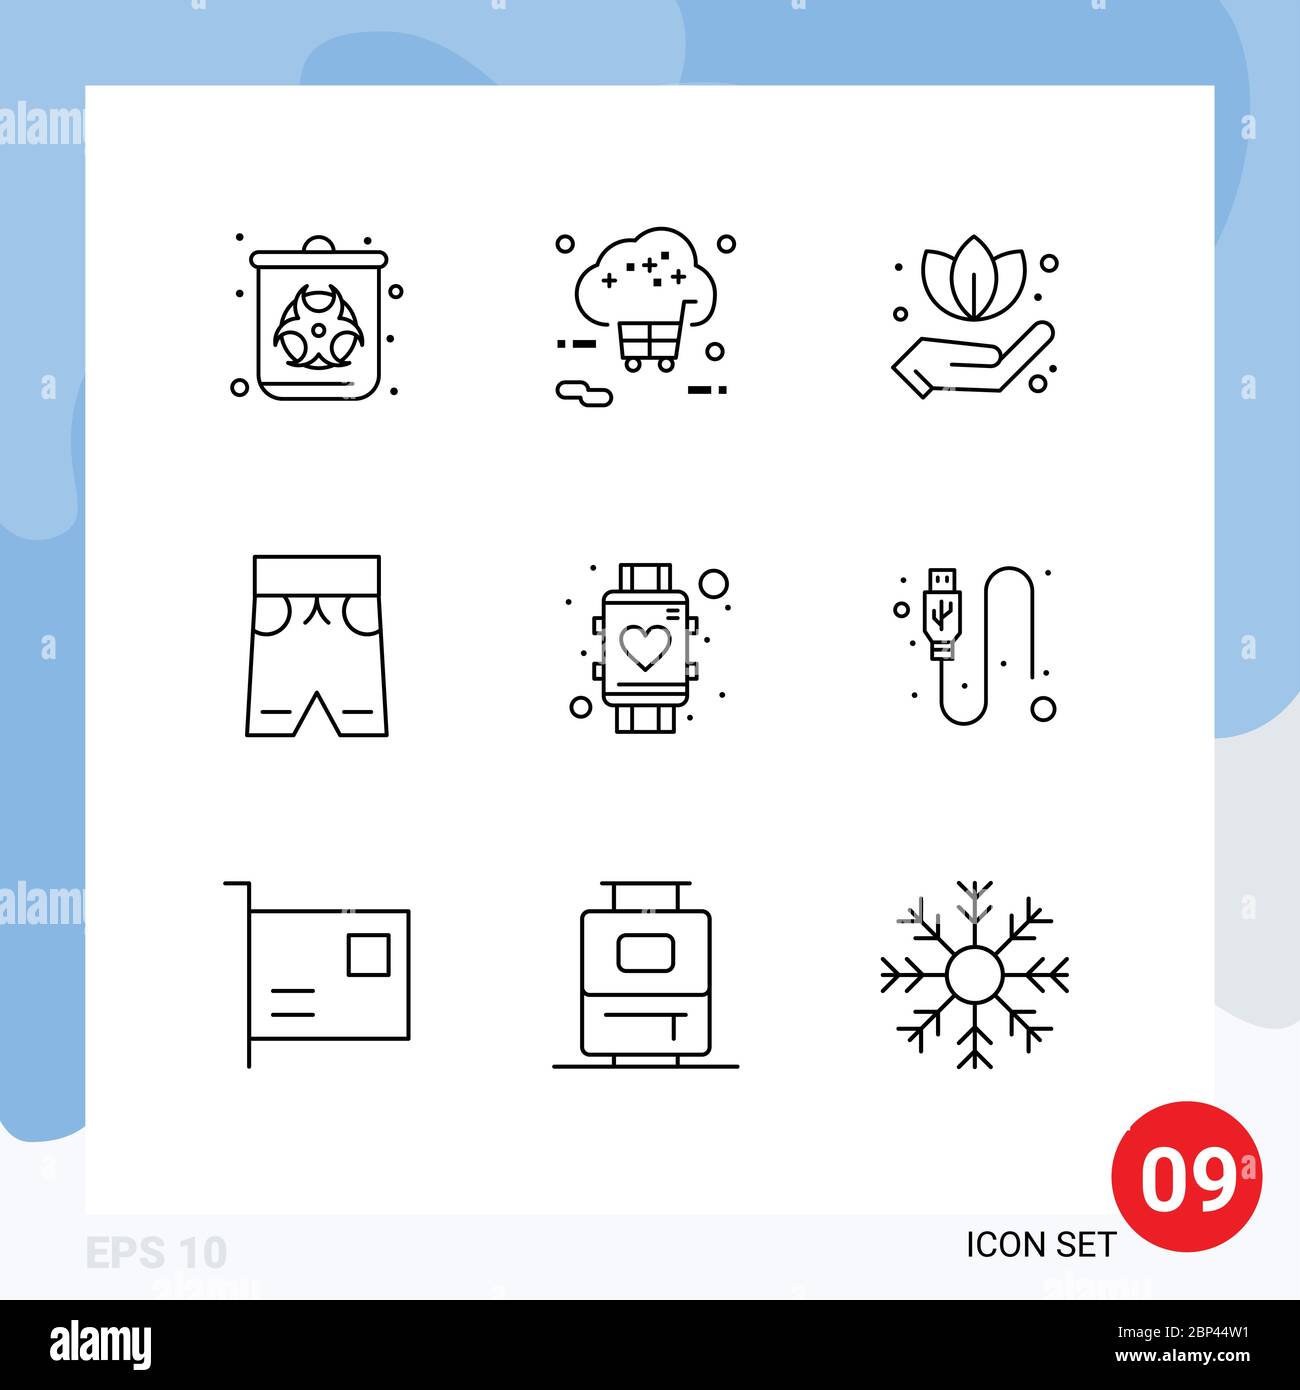 https://c8.alamy.com/comp/2BP44W1/9-universal-outlines-set-for-web-and-mobile-applications-love-shorts-shopping-short-beach-editable-vector-design-elements-2BP44W1.jpg